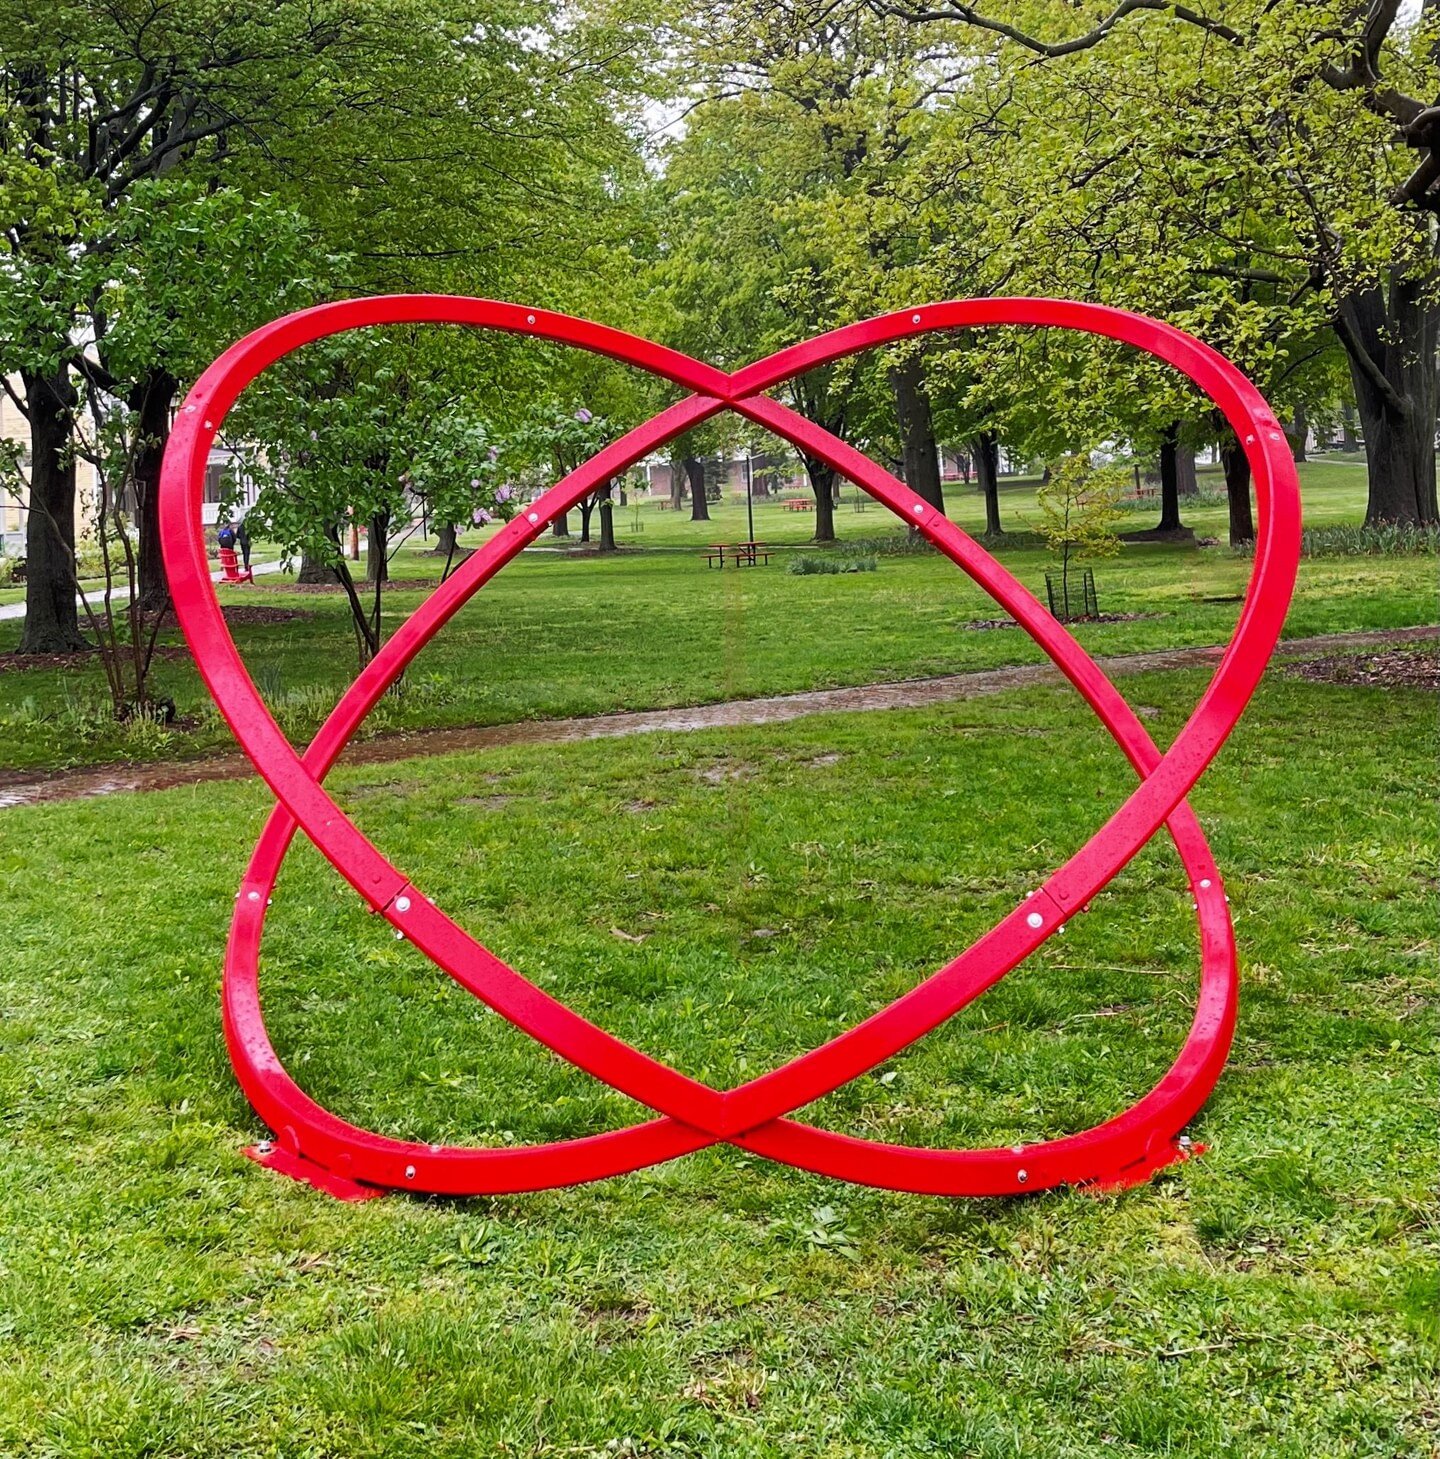 NYAE and The West Harlem Art Fund have an exciting announcement!

The West Harlem Art Fund and NY Artist Equity Association will present sculptor Miguel Otero Fuentes and his latest work XOXO on Governors Island this spring in Nolan Park. 

&ldquo;XO